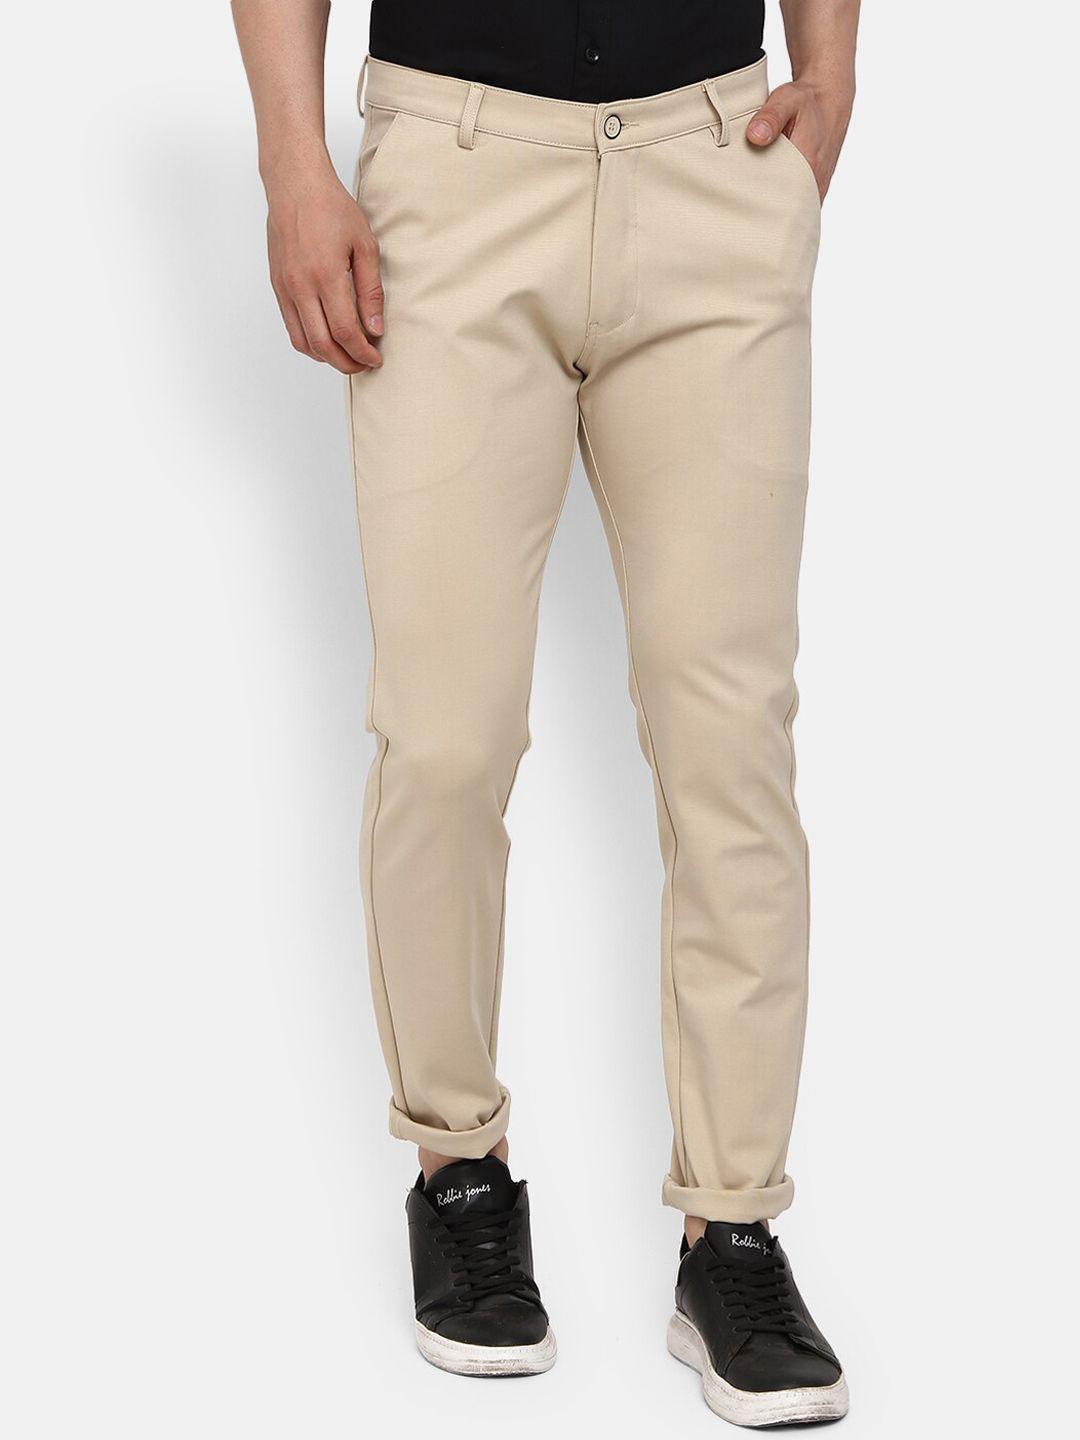 v-mart men beige classic cotton slim fit chinos trousers